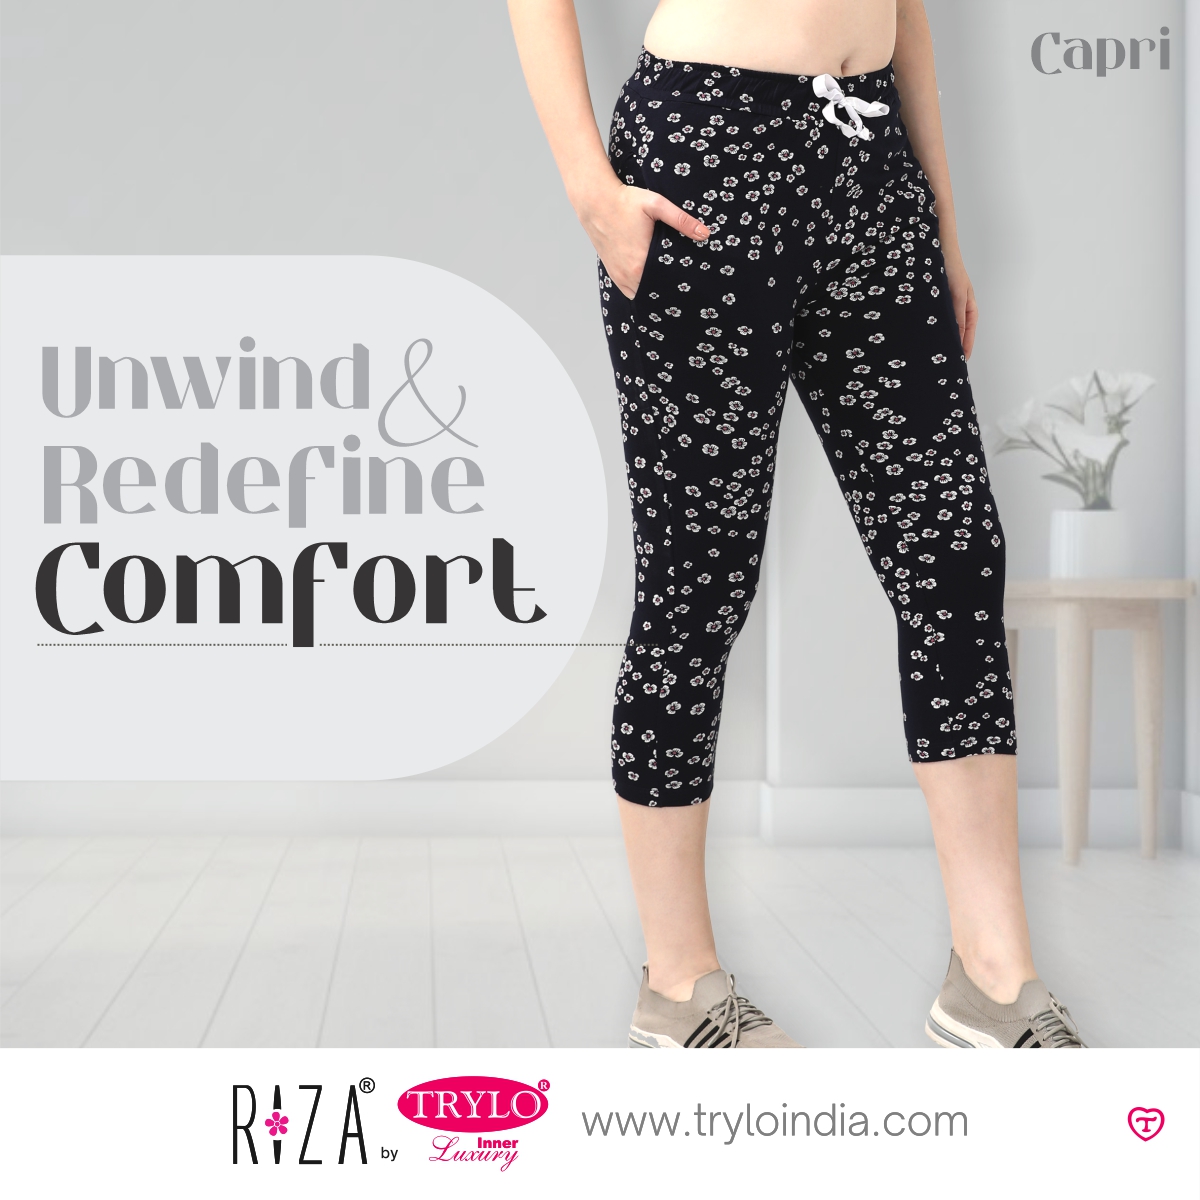 RIZA by TRYLO - Try out our new Dry Fit Leggings, It's